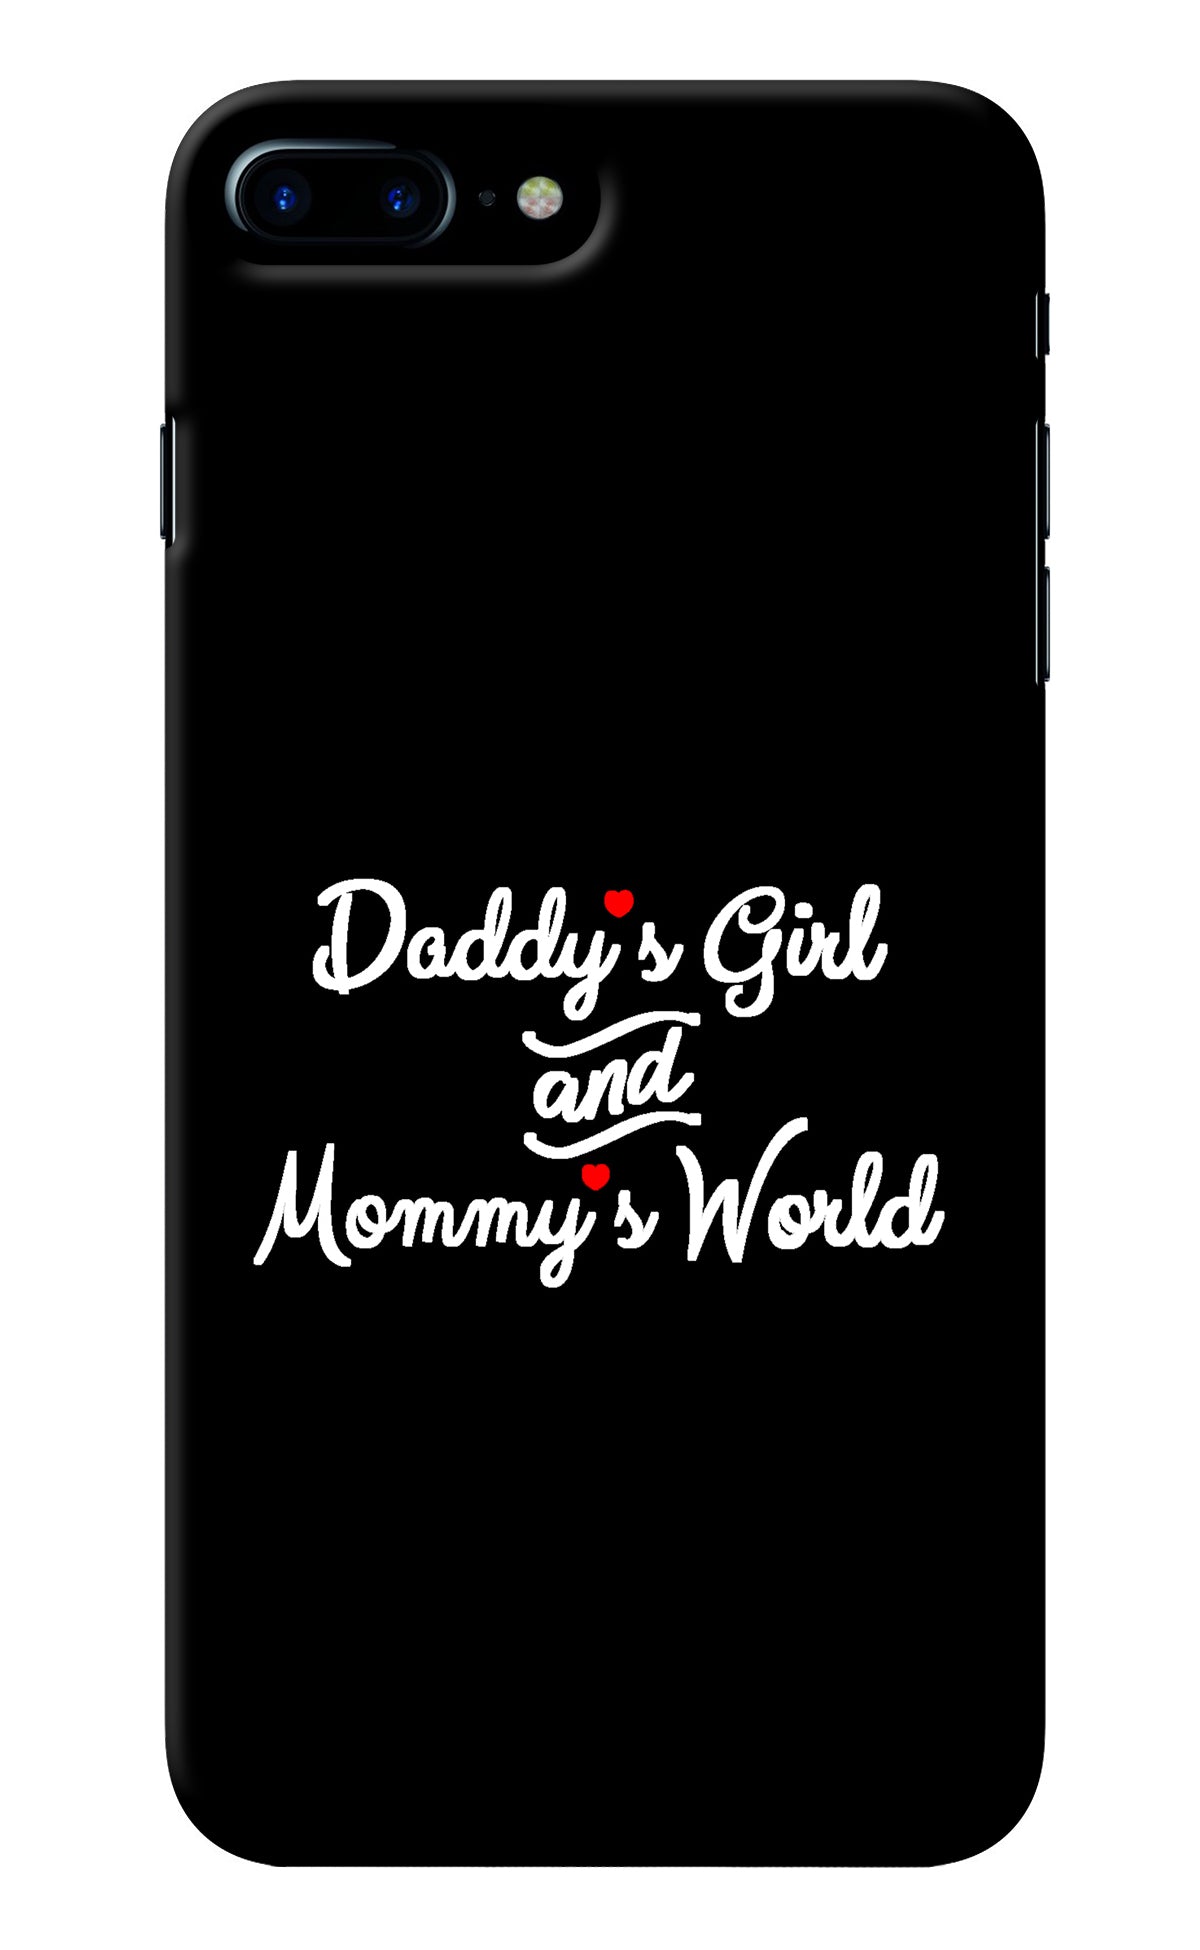 Daddy's Girl and Mommy's World iPhone 7 Plus Back Cover